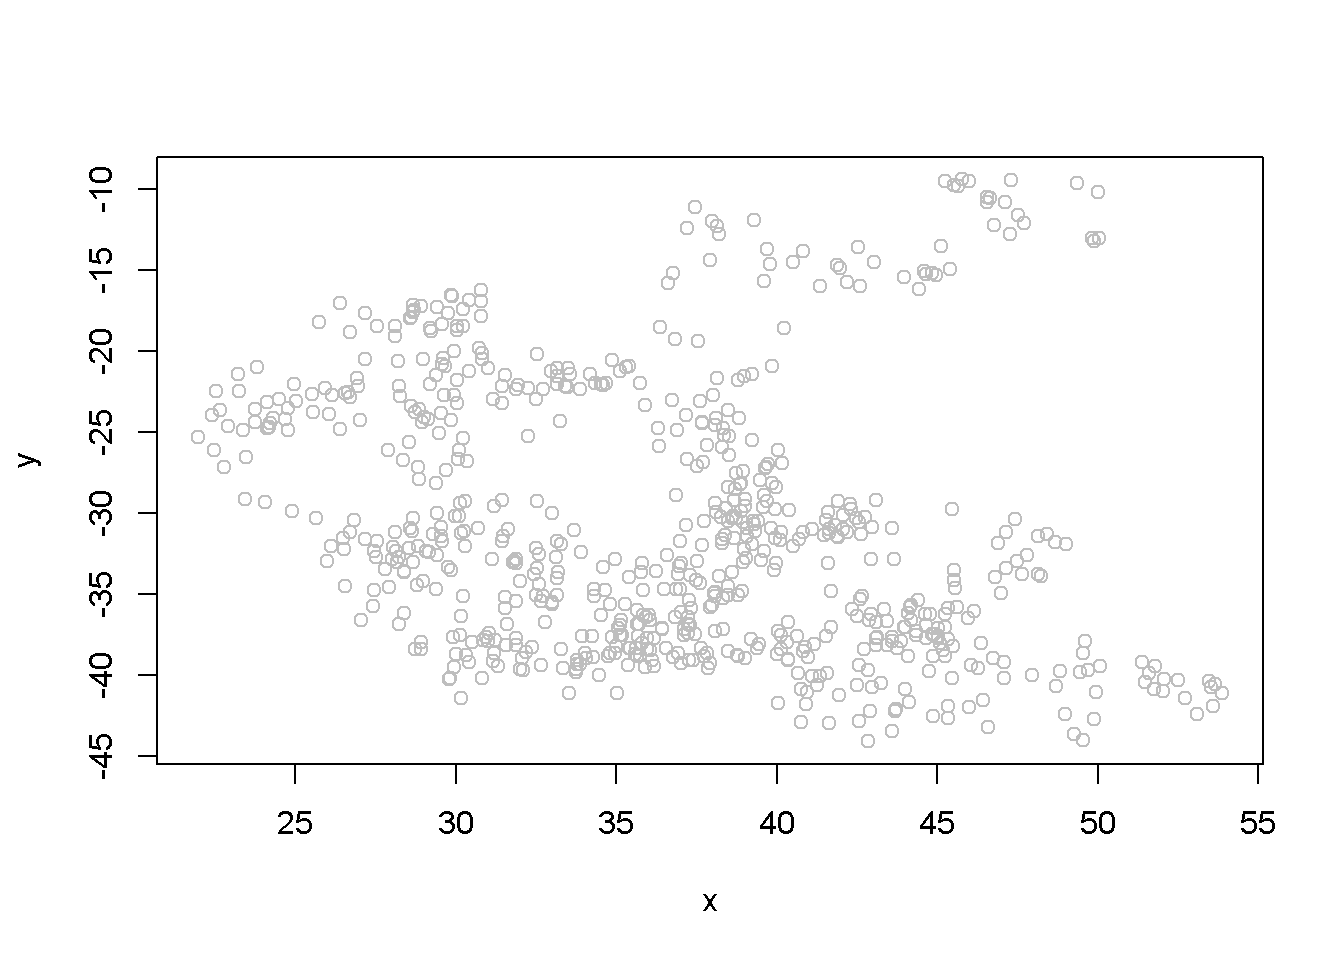 Scatter plot of artificial series y and x